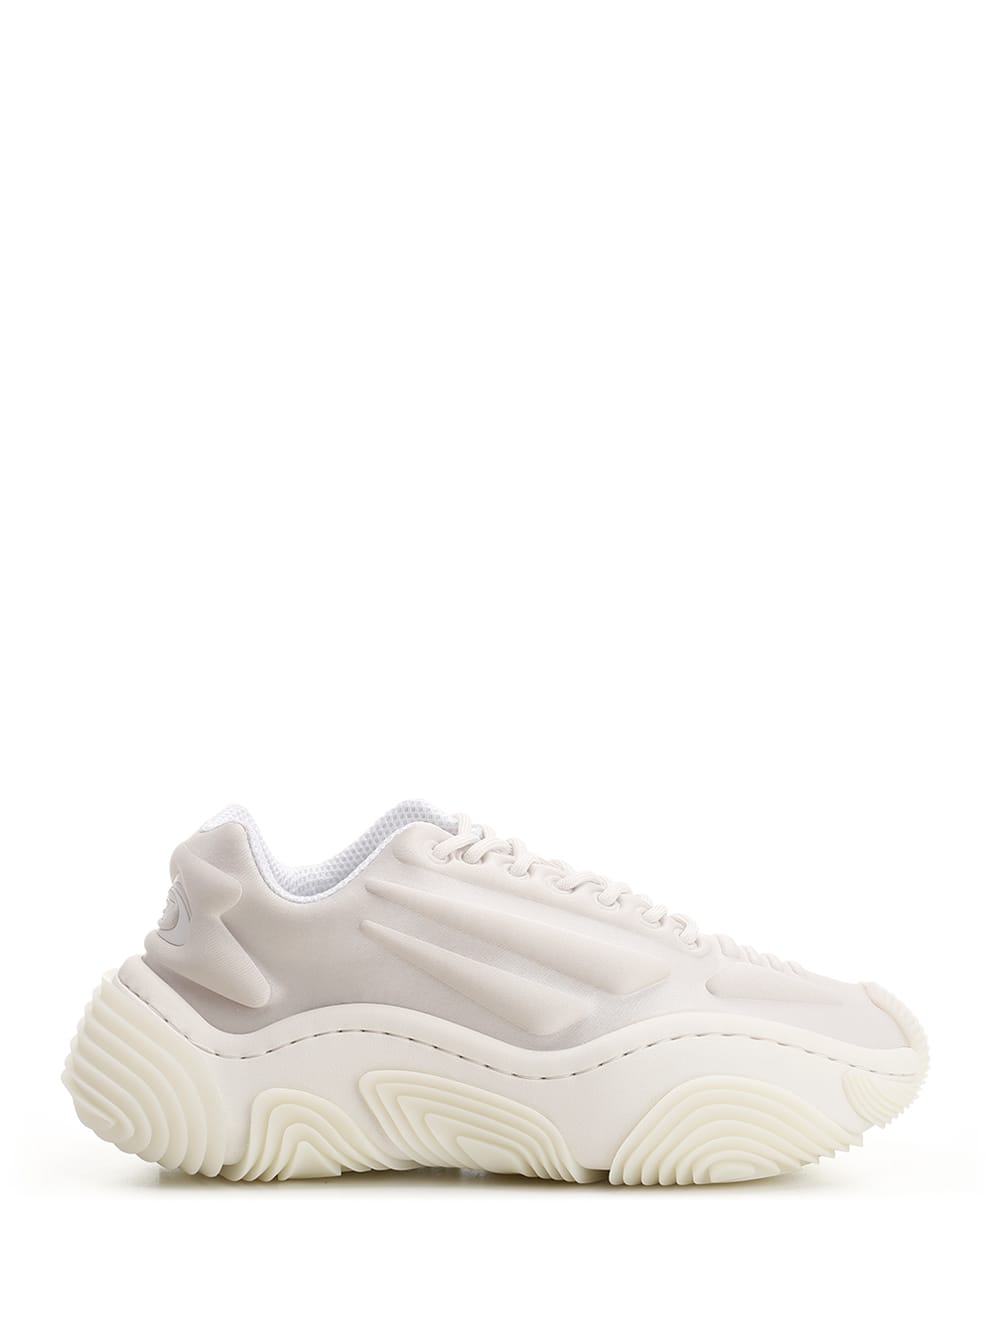 ALEXANDER WANG WHITE AW VORDEX SNEAKERS